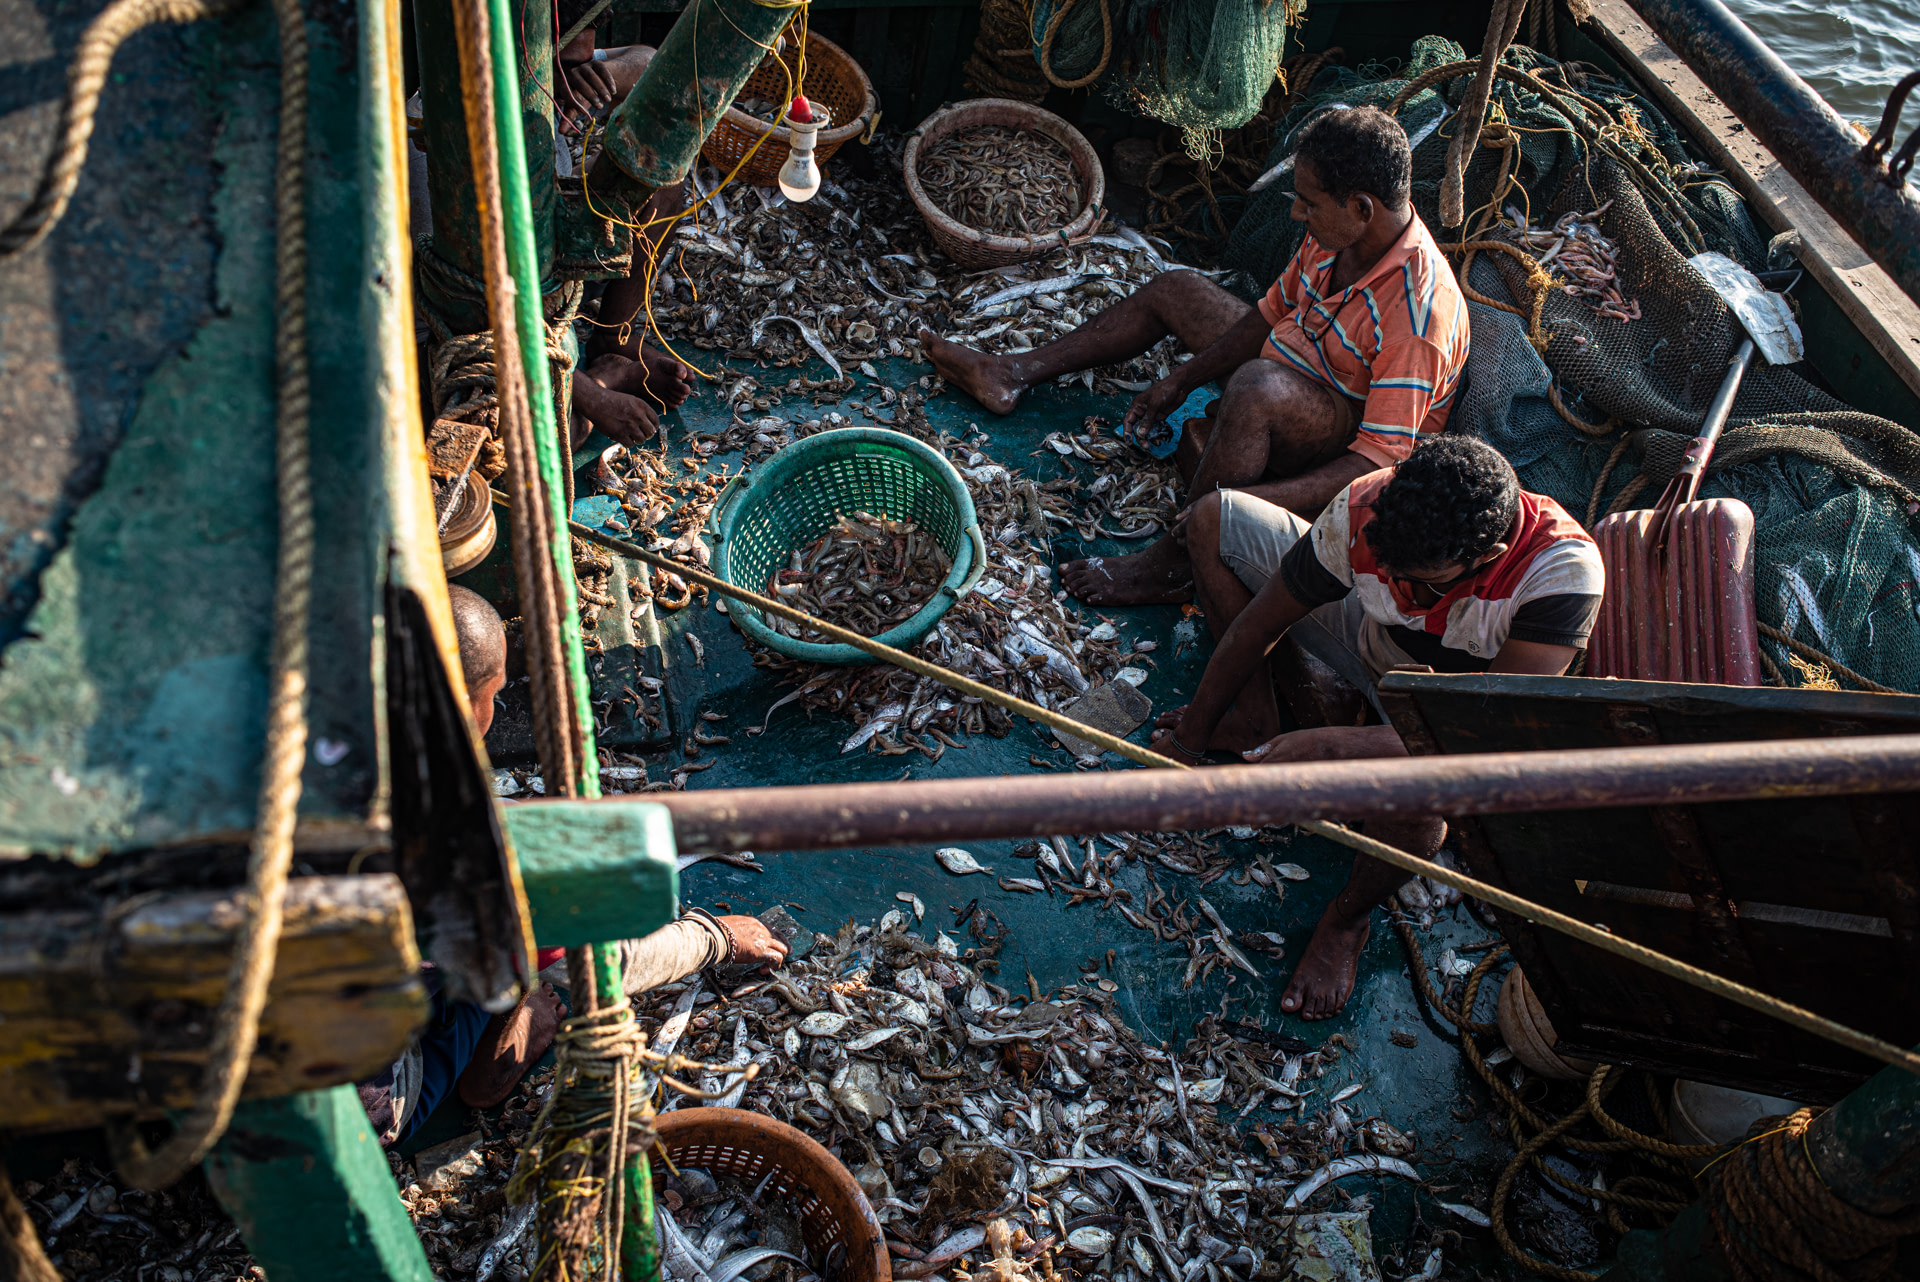 Fishermen separate different kinds of small fish and crustaceans on a trawler. Once the main load of fish is removed from the boat, the fishermen go through the bycatch and recover catch that they can use. This will be mostly for their personal consumptio